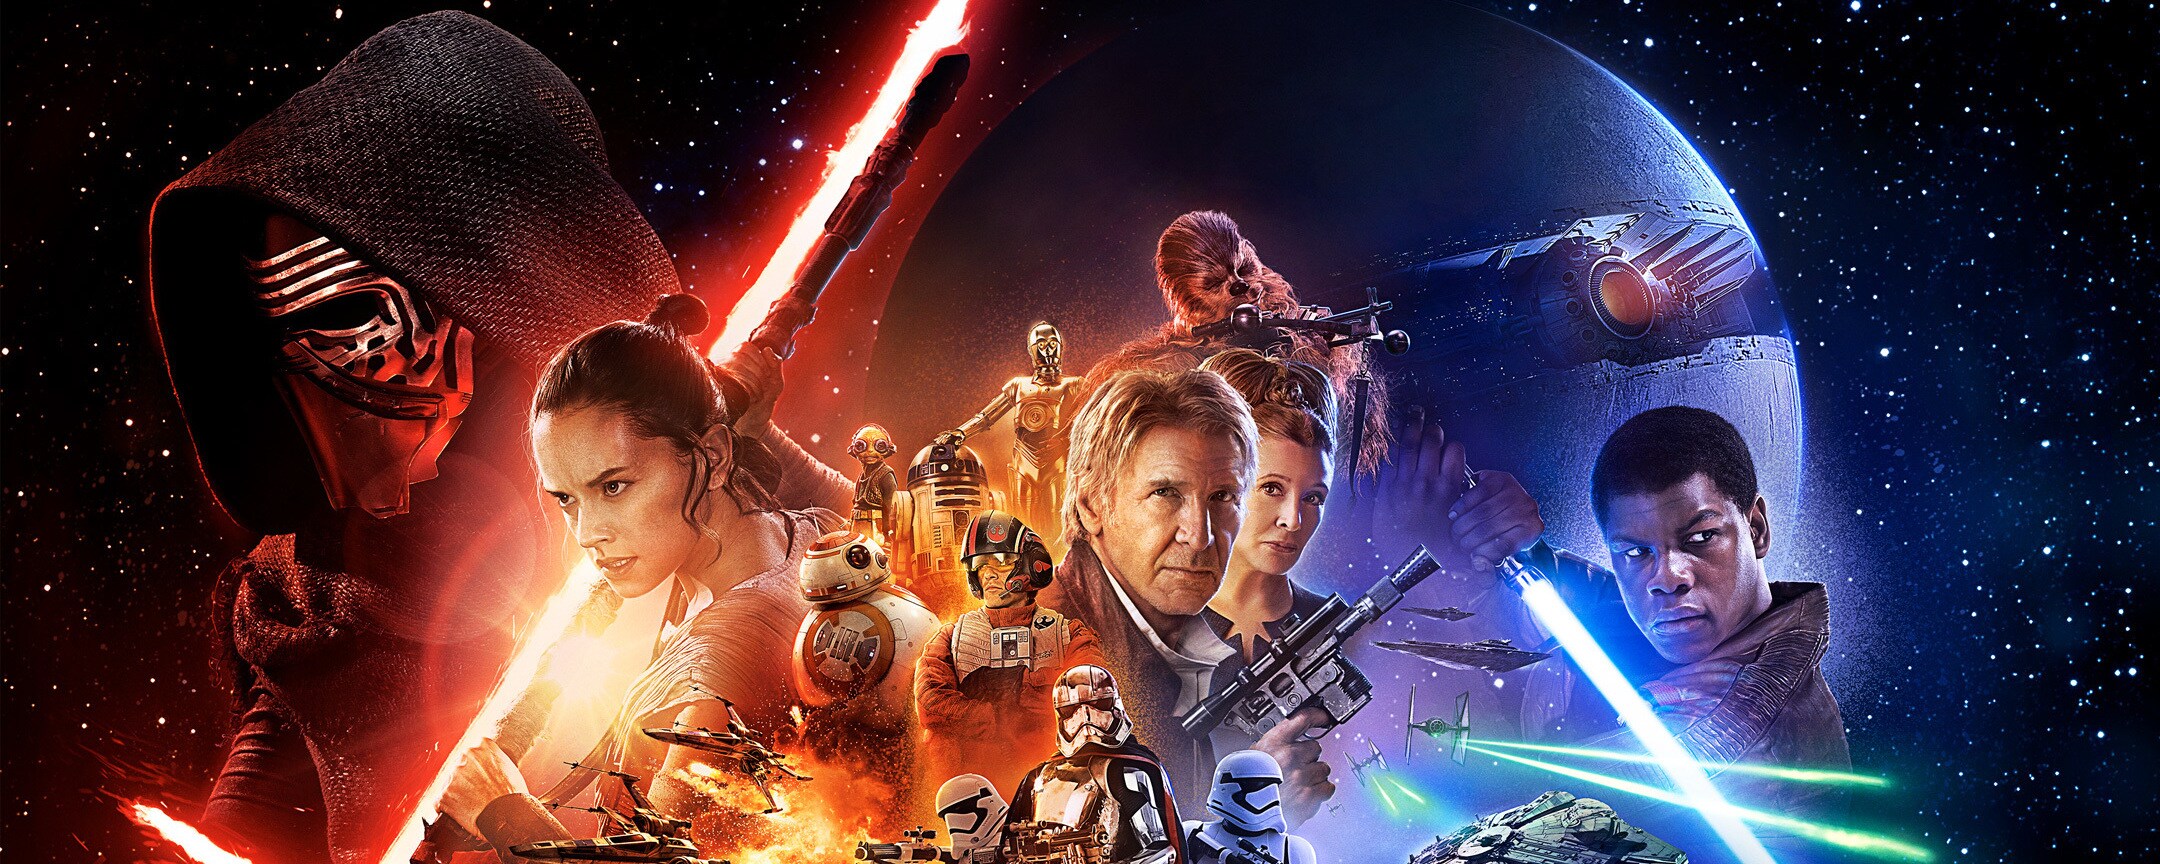 Star Wars: The Force Awakens Theatrical Poster First Look